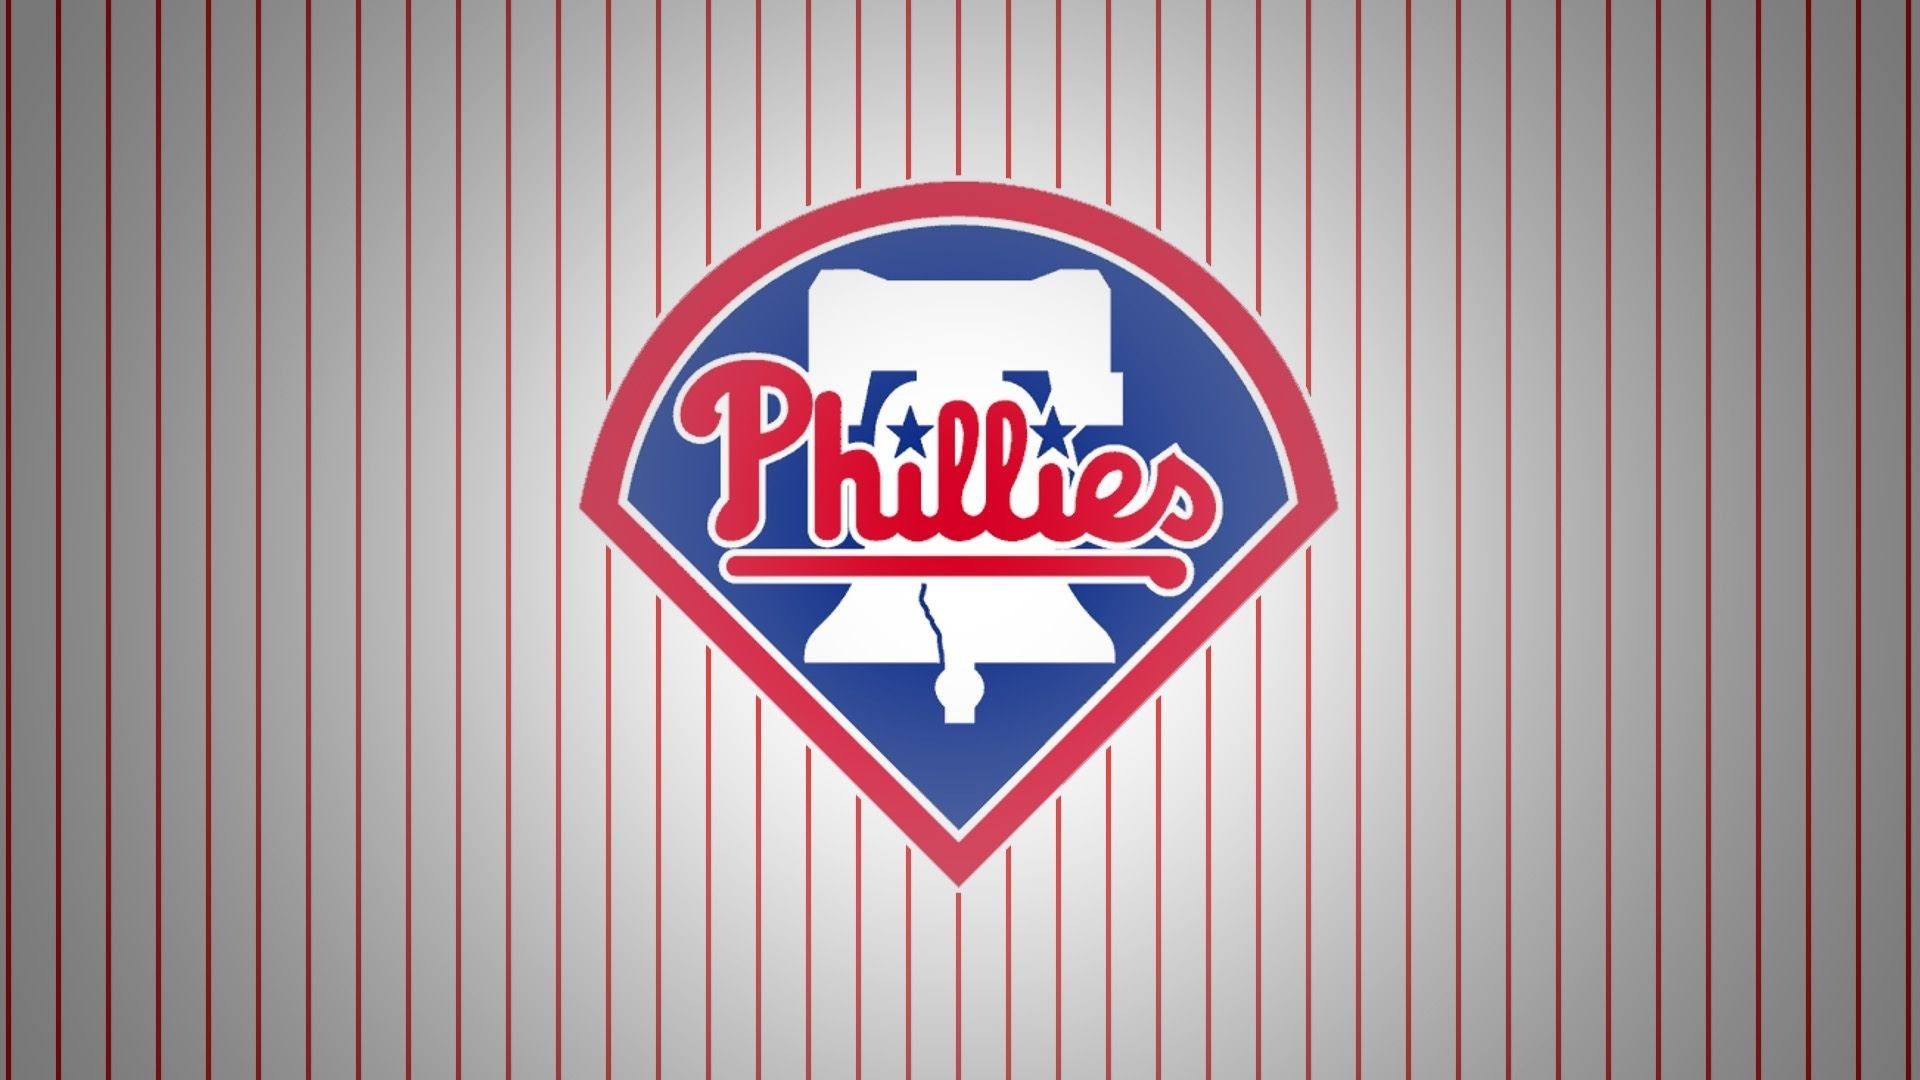 Phillies Wallpaper Free Phillies Background